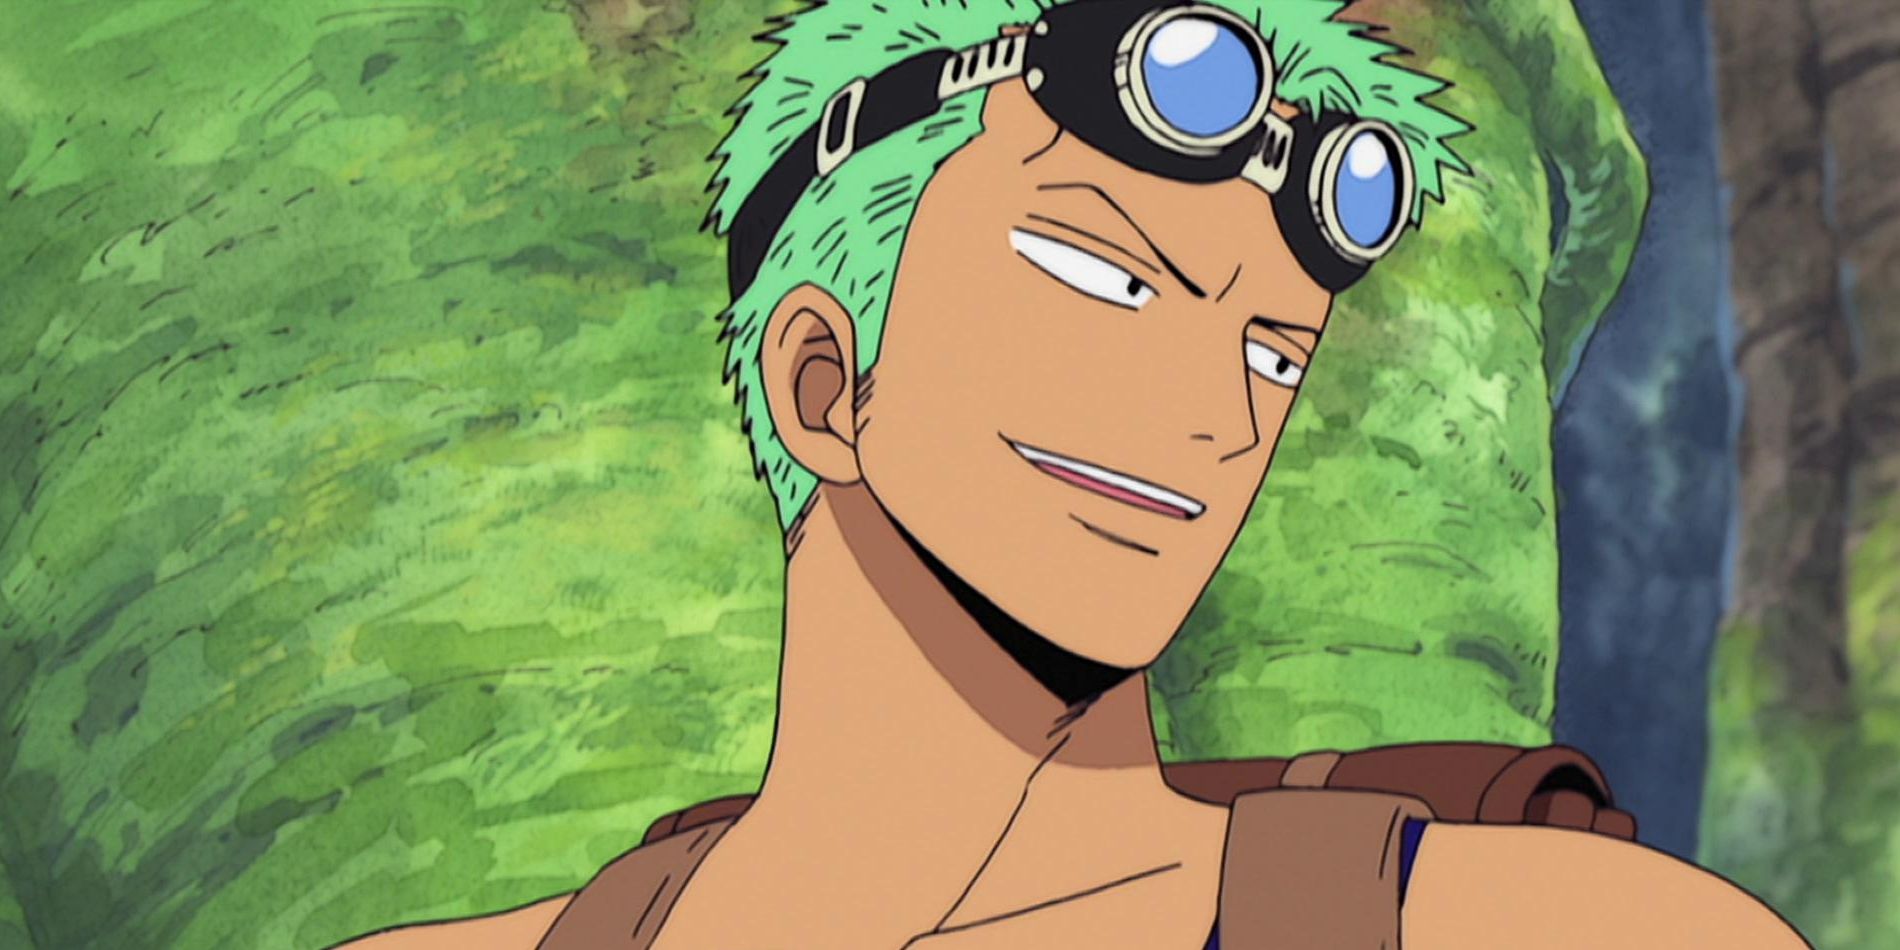 Zoro in Skypea outfit